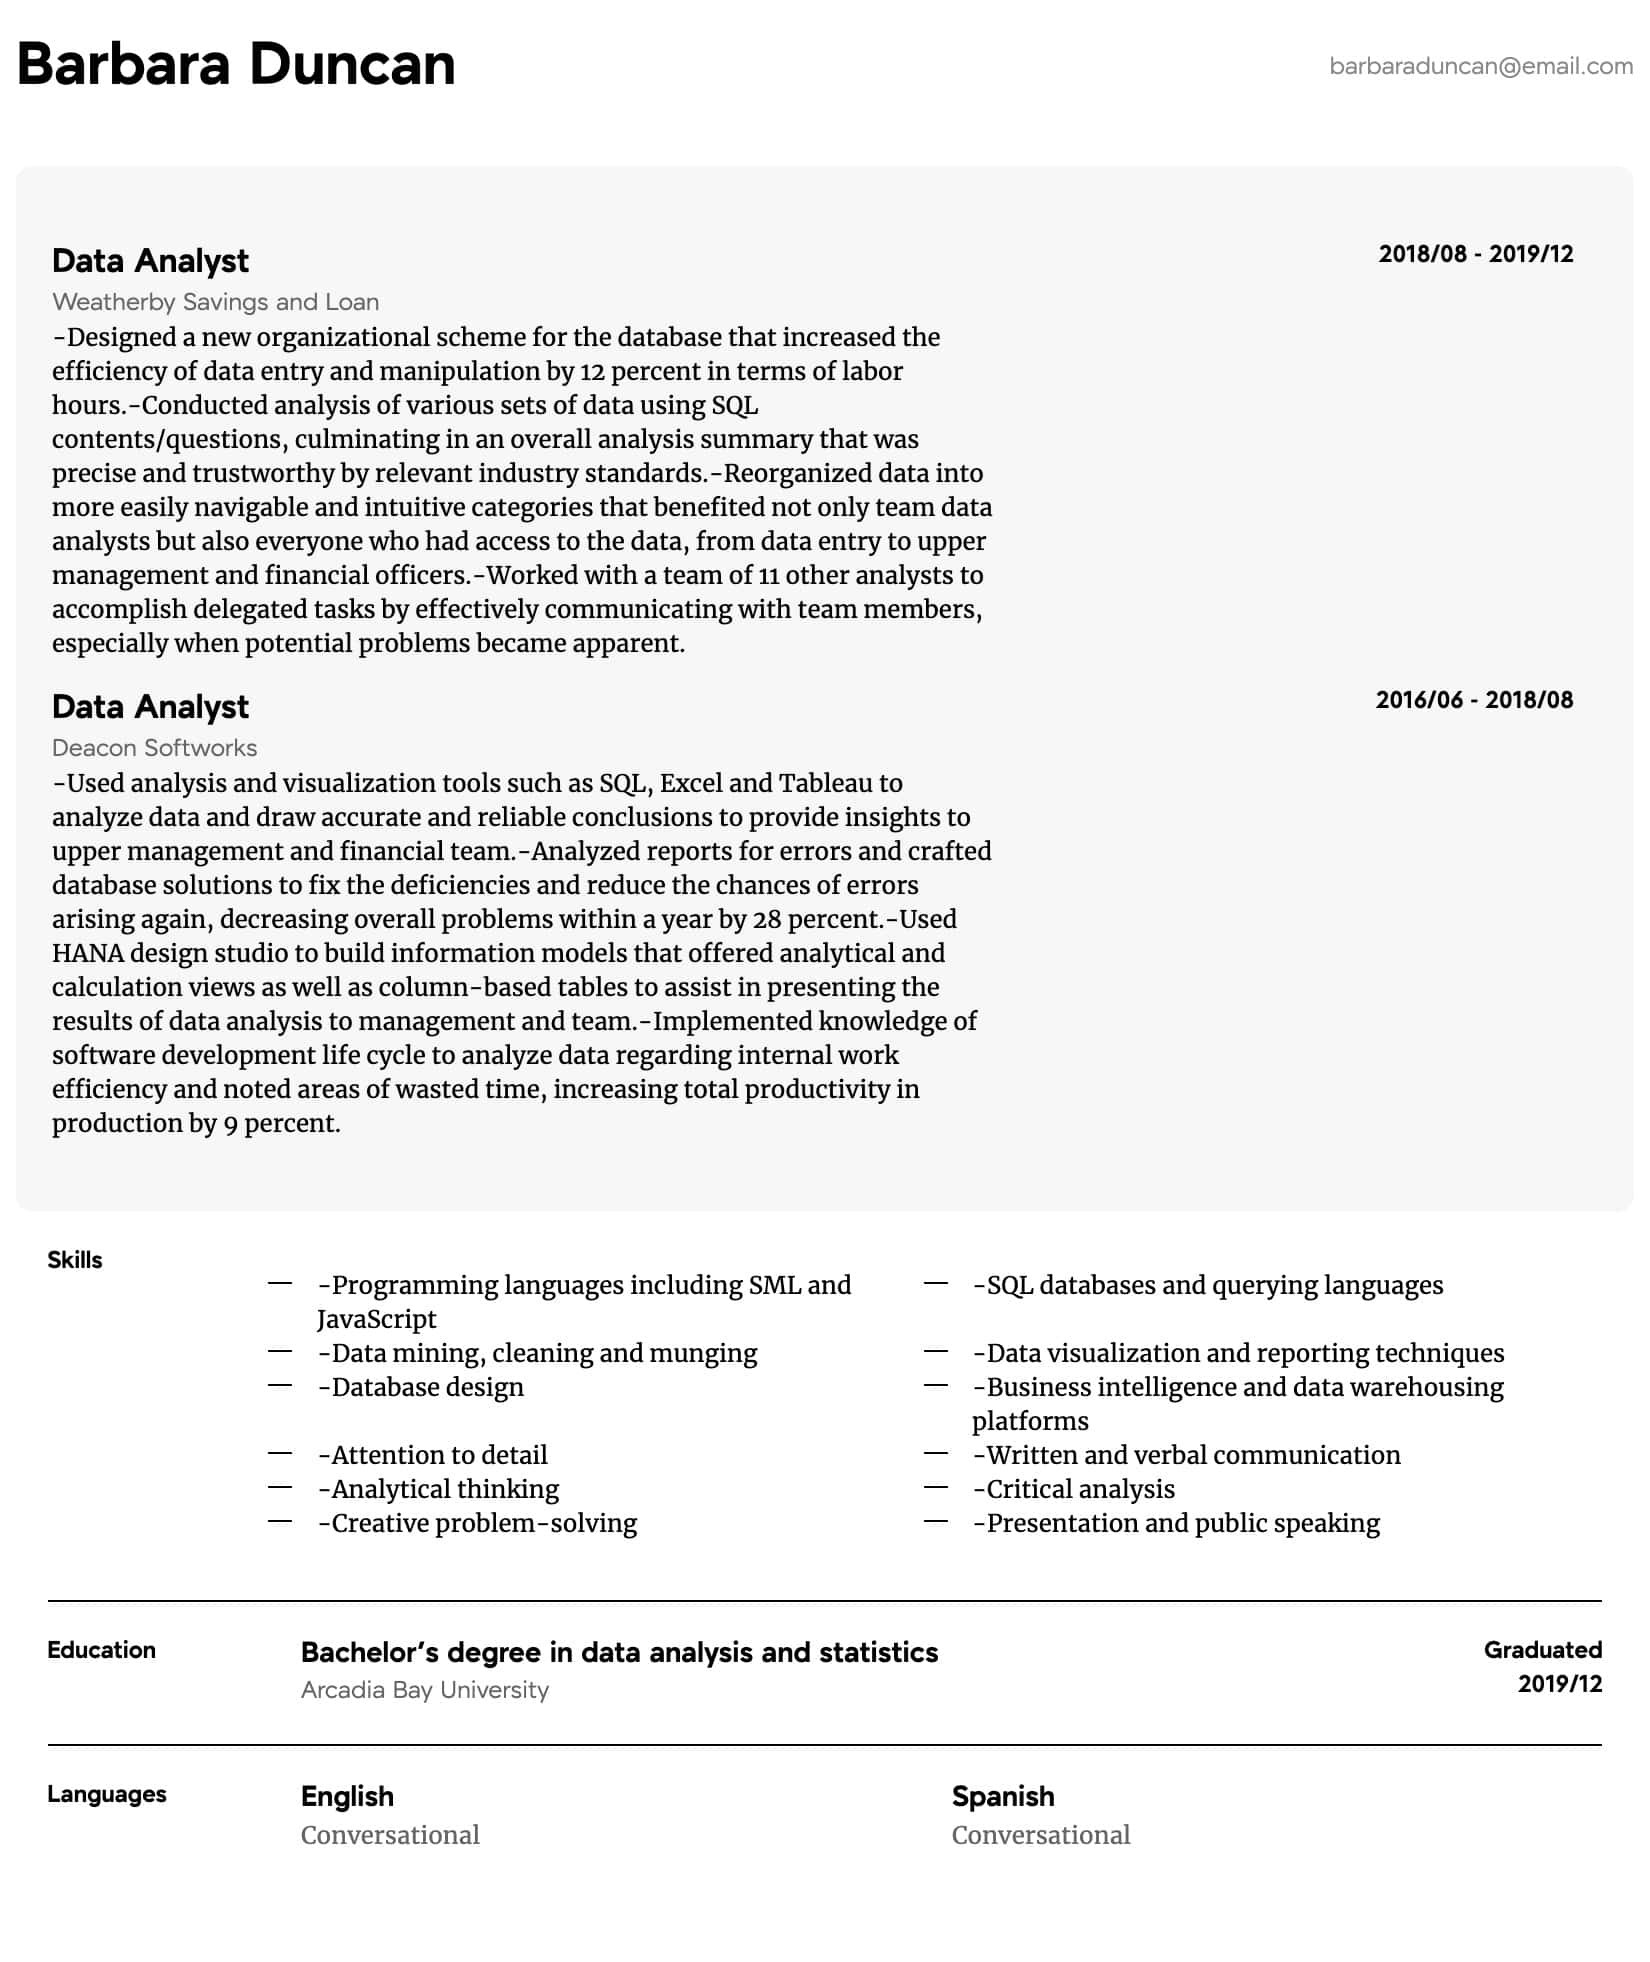 Sample Resume Of A Data Analyst Data Analyst Resume Samples All Experience Levels Resume.com …